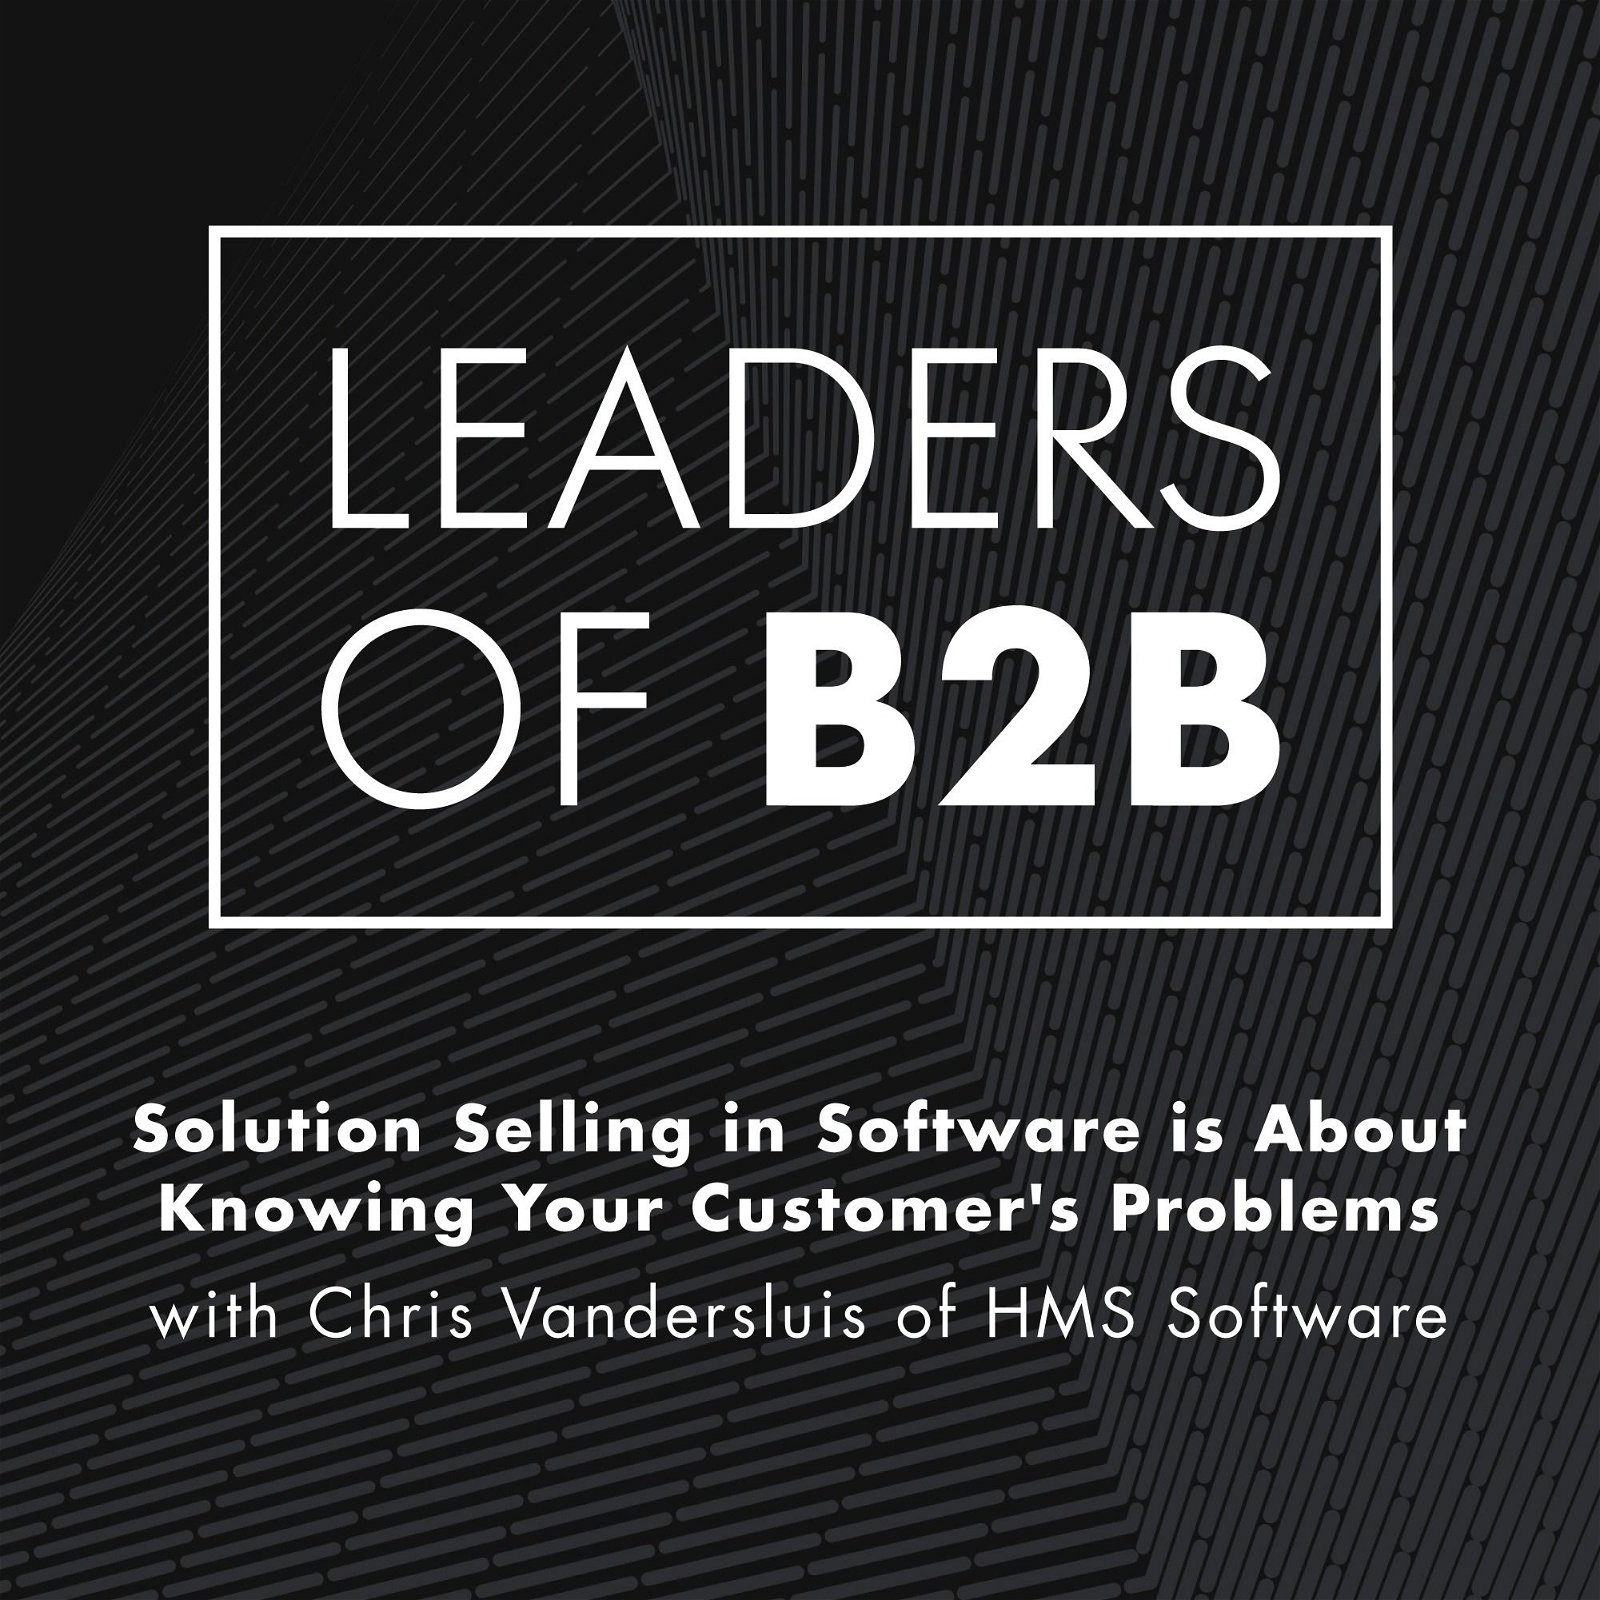 Solution Selling in Software is About Knowing Your Customer's Problems, with Chris Vandersluis of HMS Software